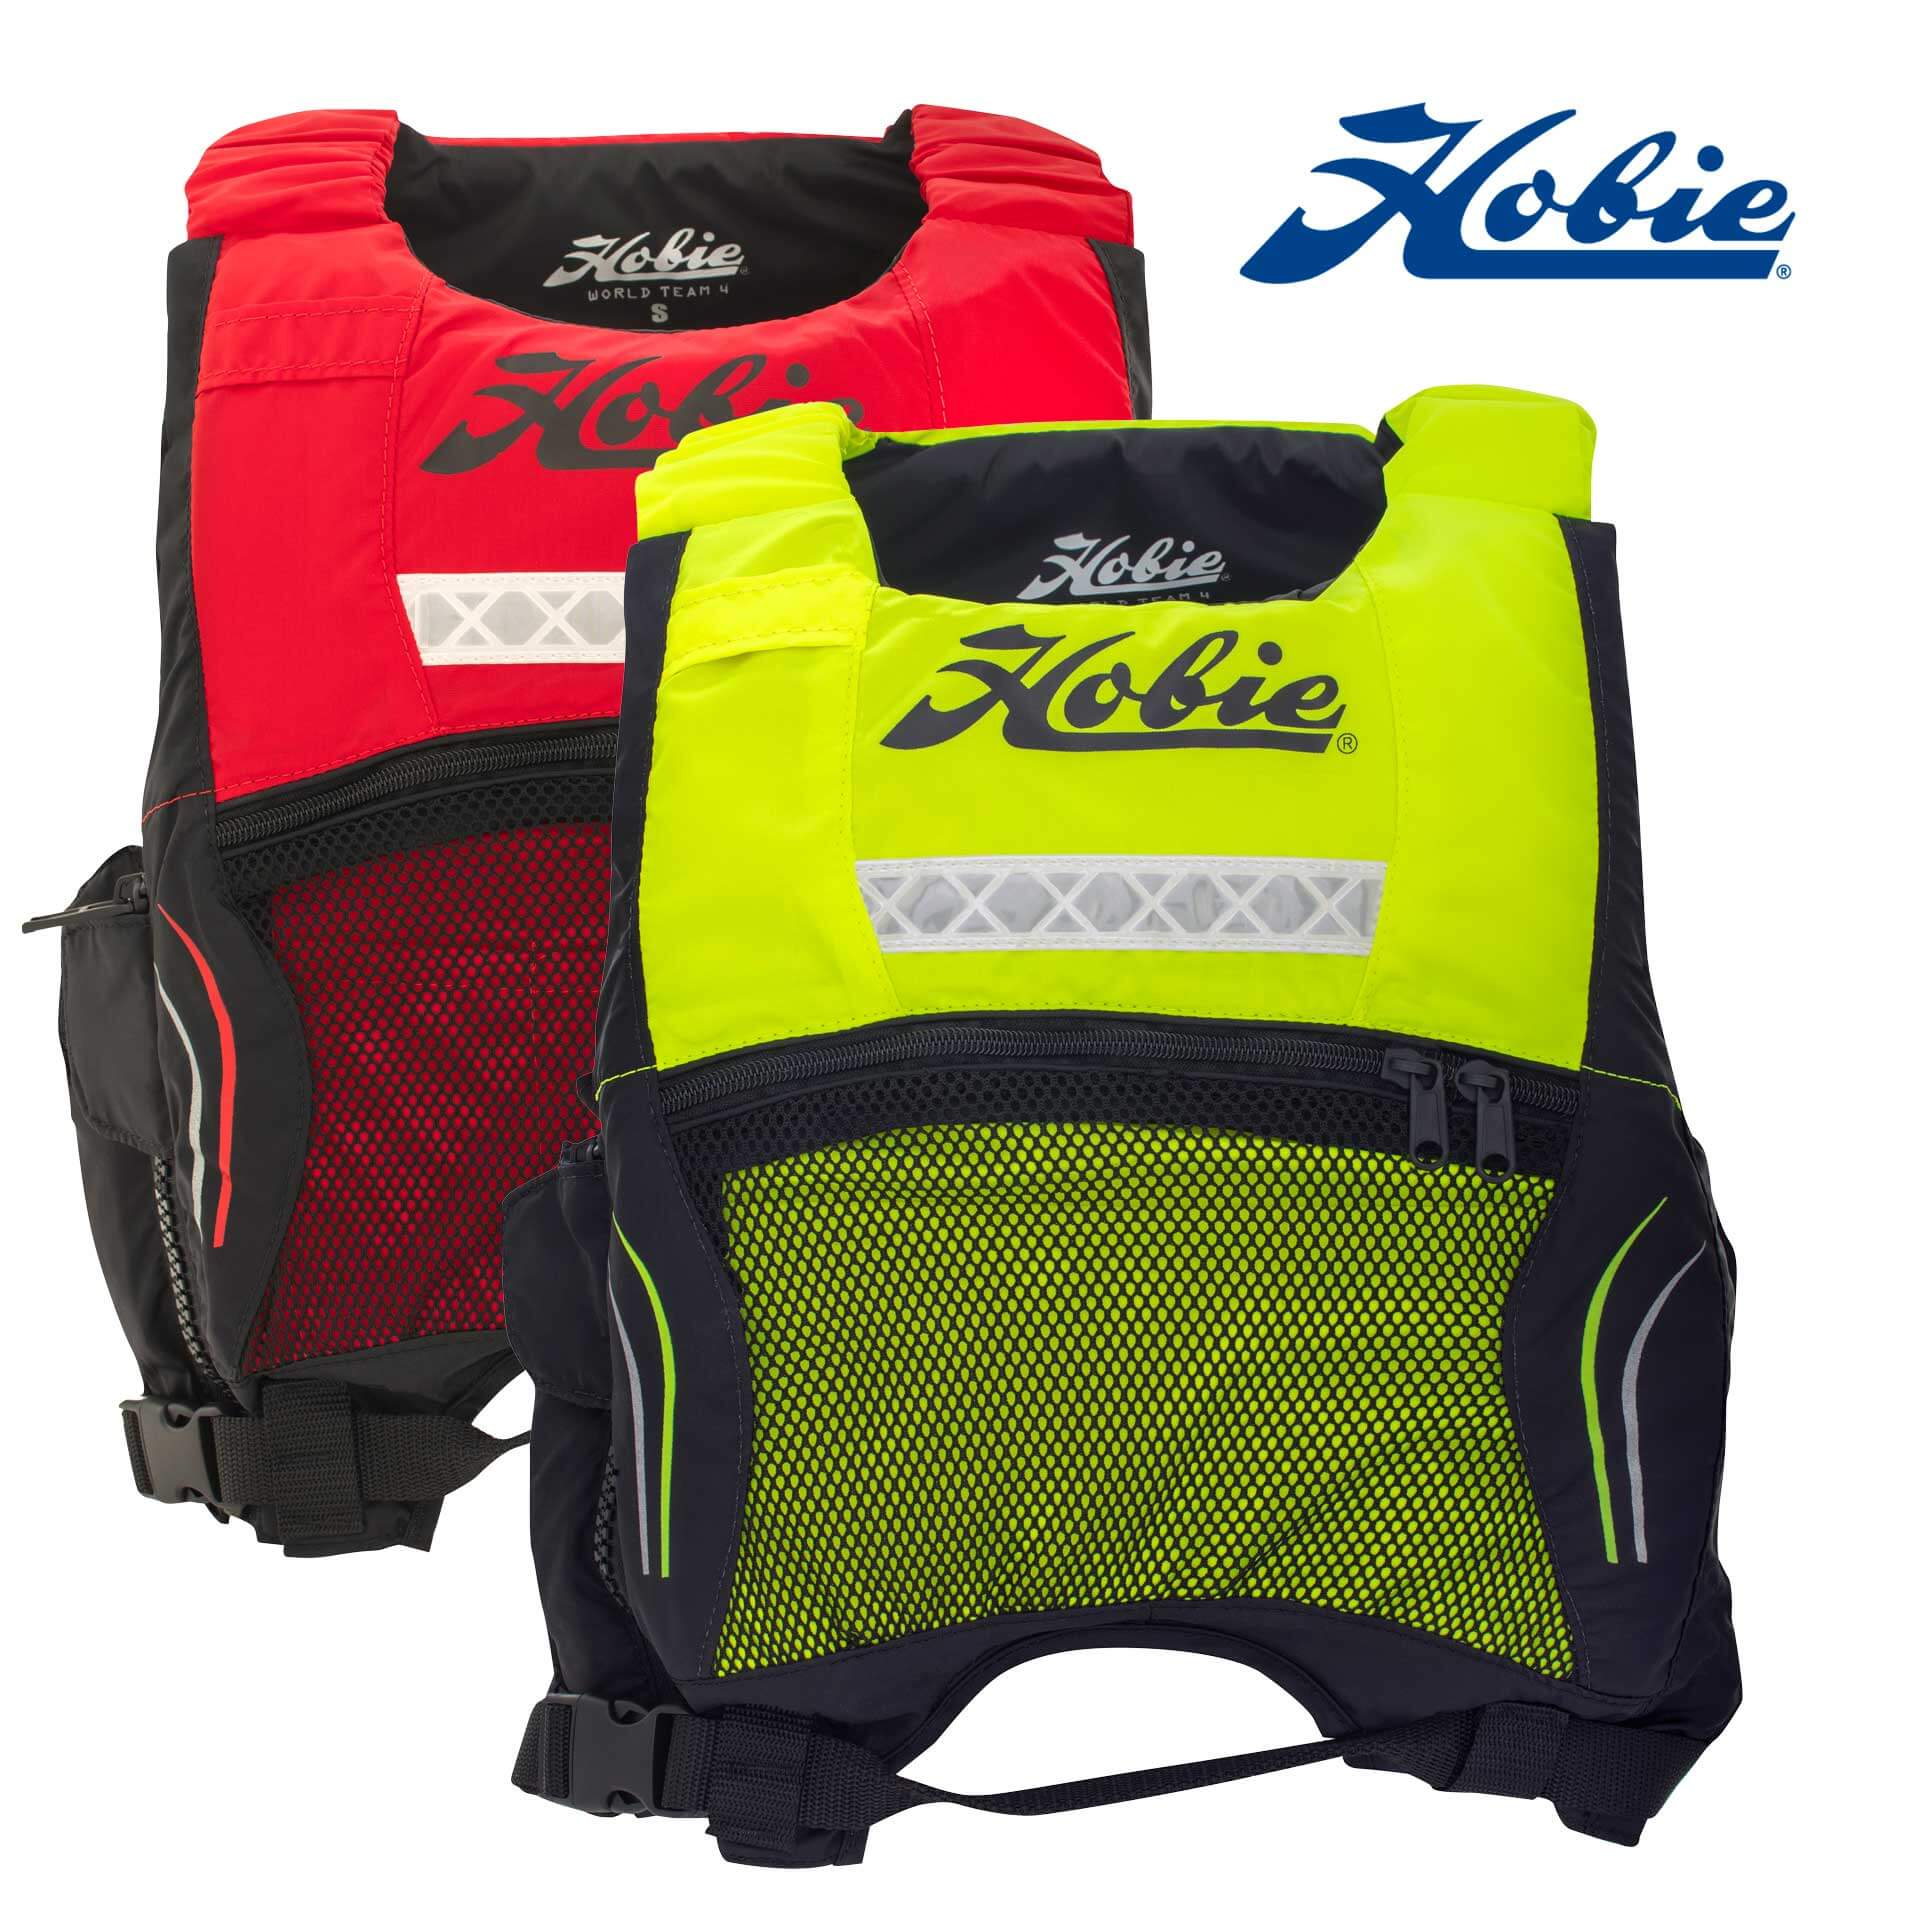 Hobie PFD World Team 4 2018 In Red And Yellow sku: